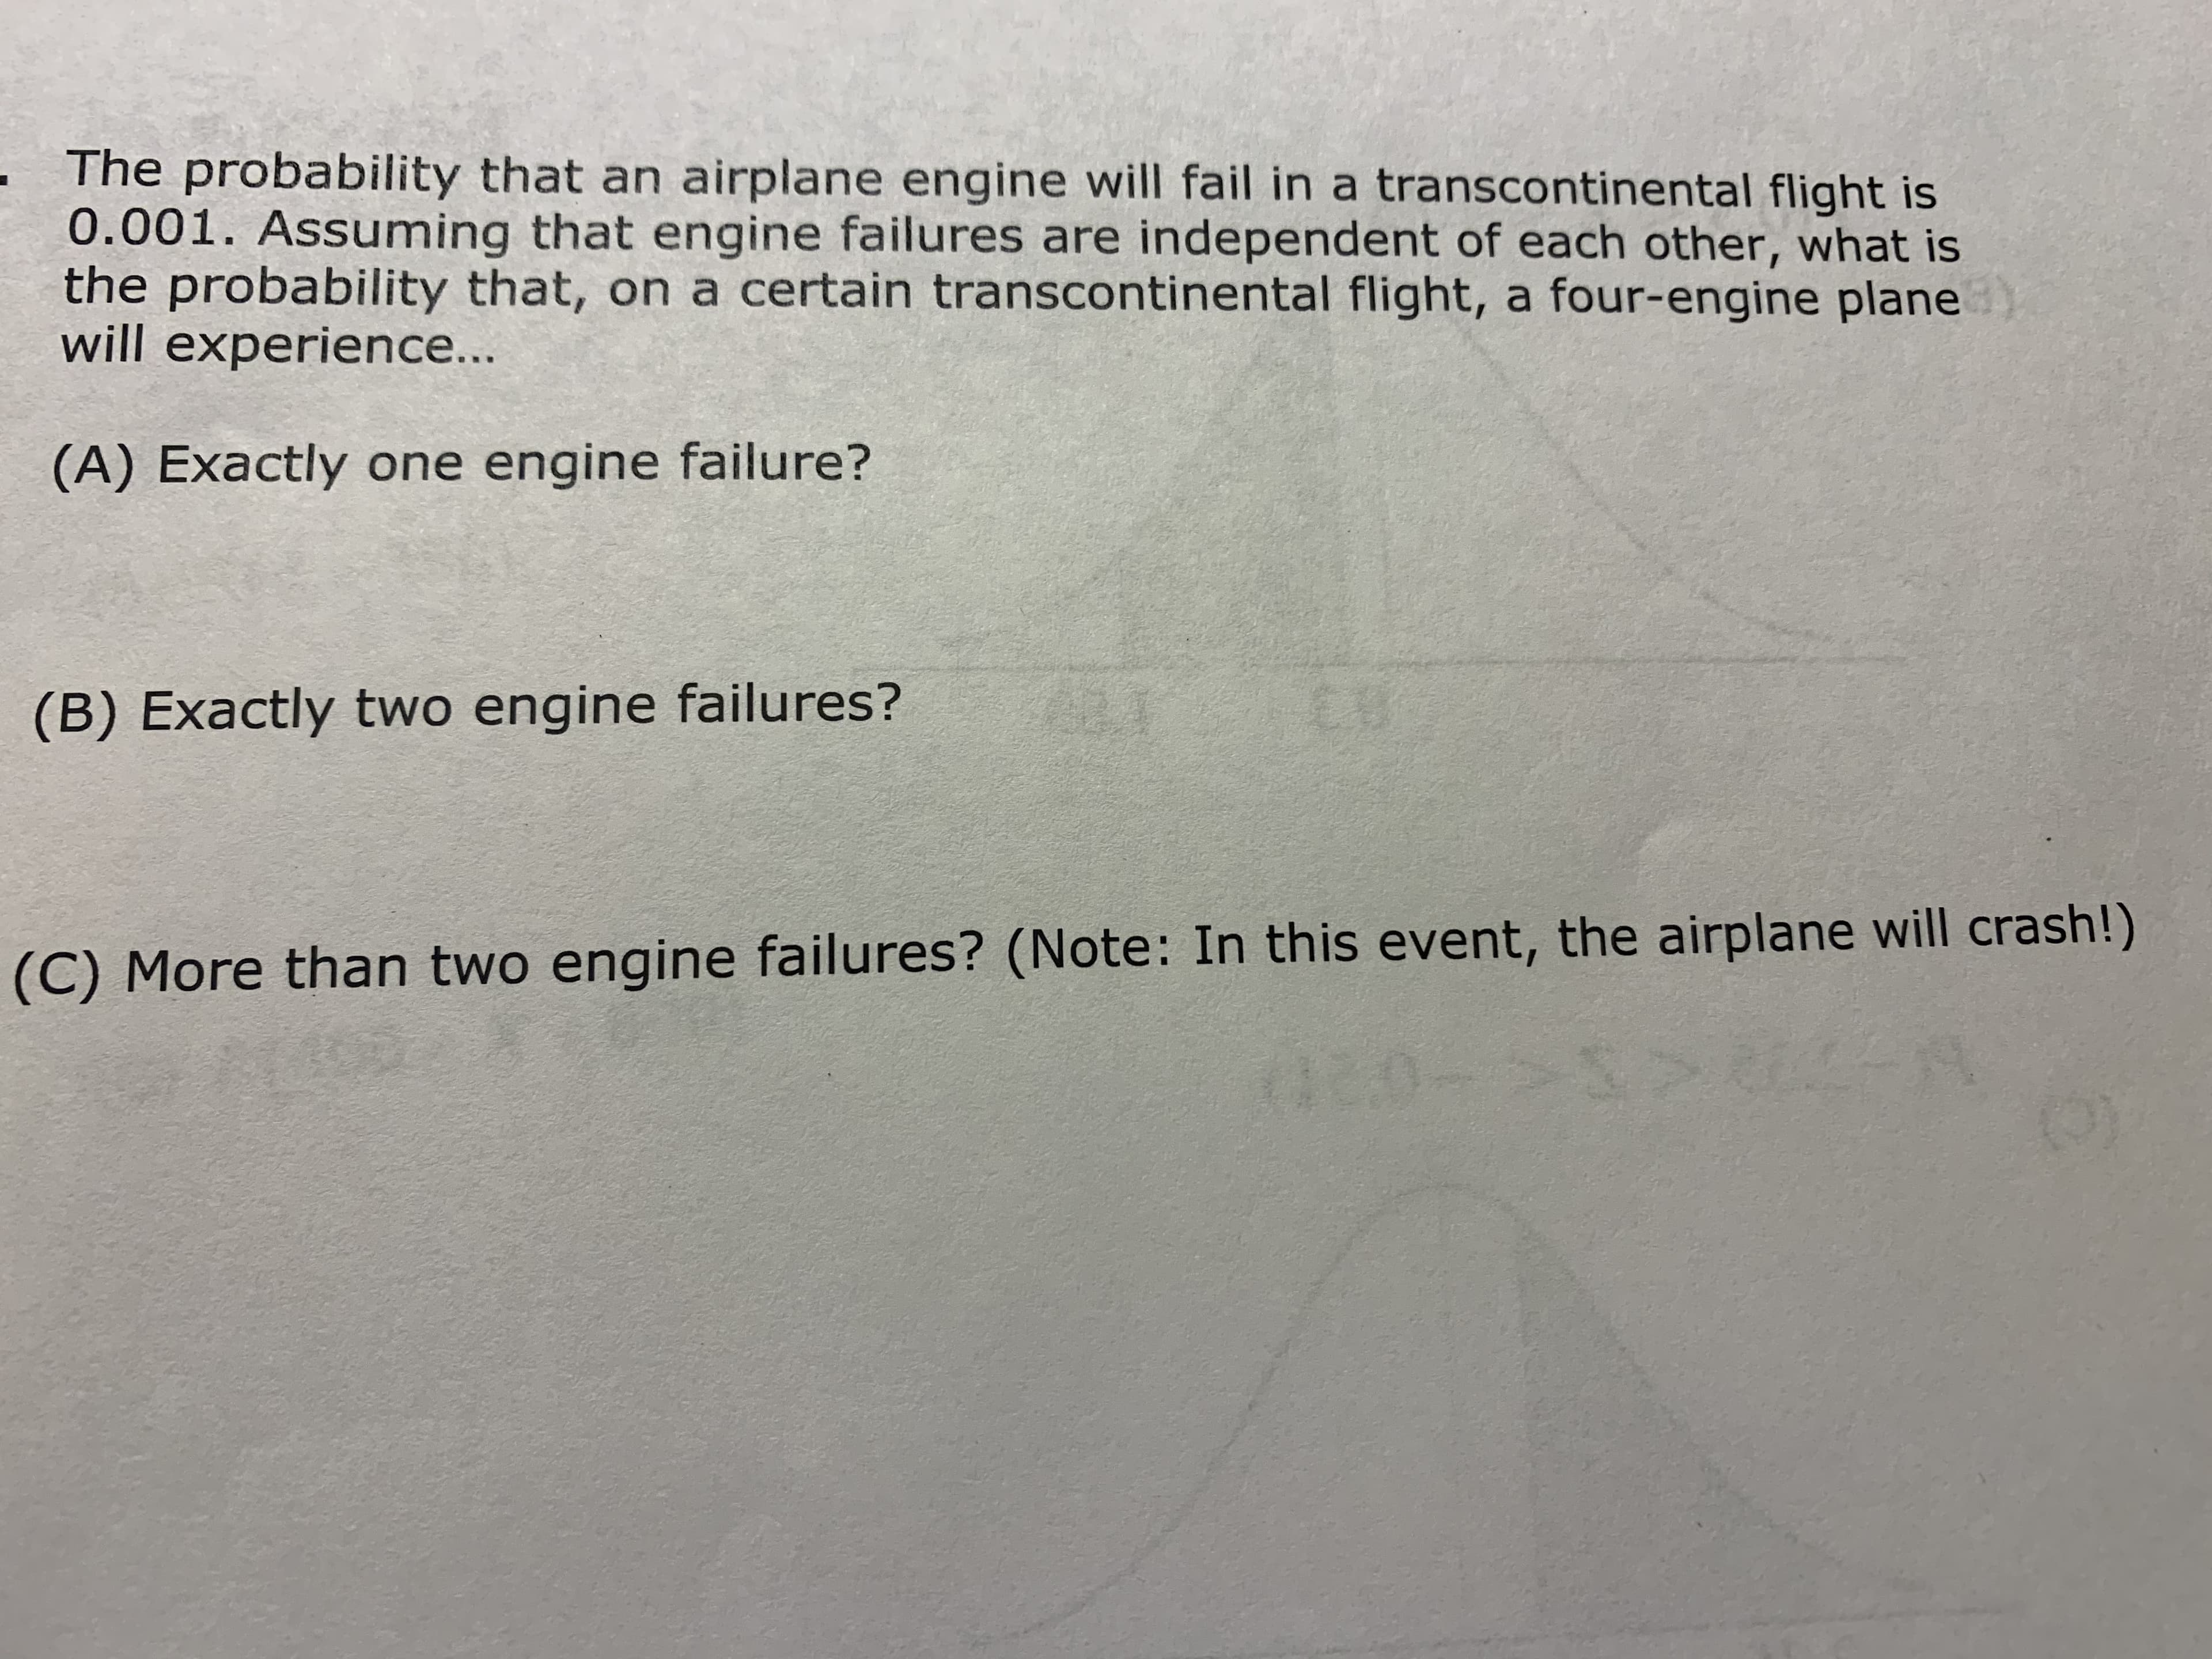 The probability that an airplane engine will fail in a transcontinental flight is
0.001. Assuming that engine failures are independent of each other, what is
the probability that, on a certain transcontinental flight, a four-engine plane
will experience...
(A) Exactly one engine failure?
EU
(B) Exactly two engine failures?
(C) More than two engine failures? (Note: In this event, the airplane will crash!)
